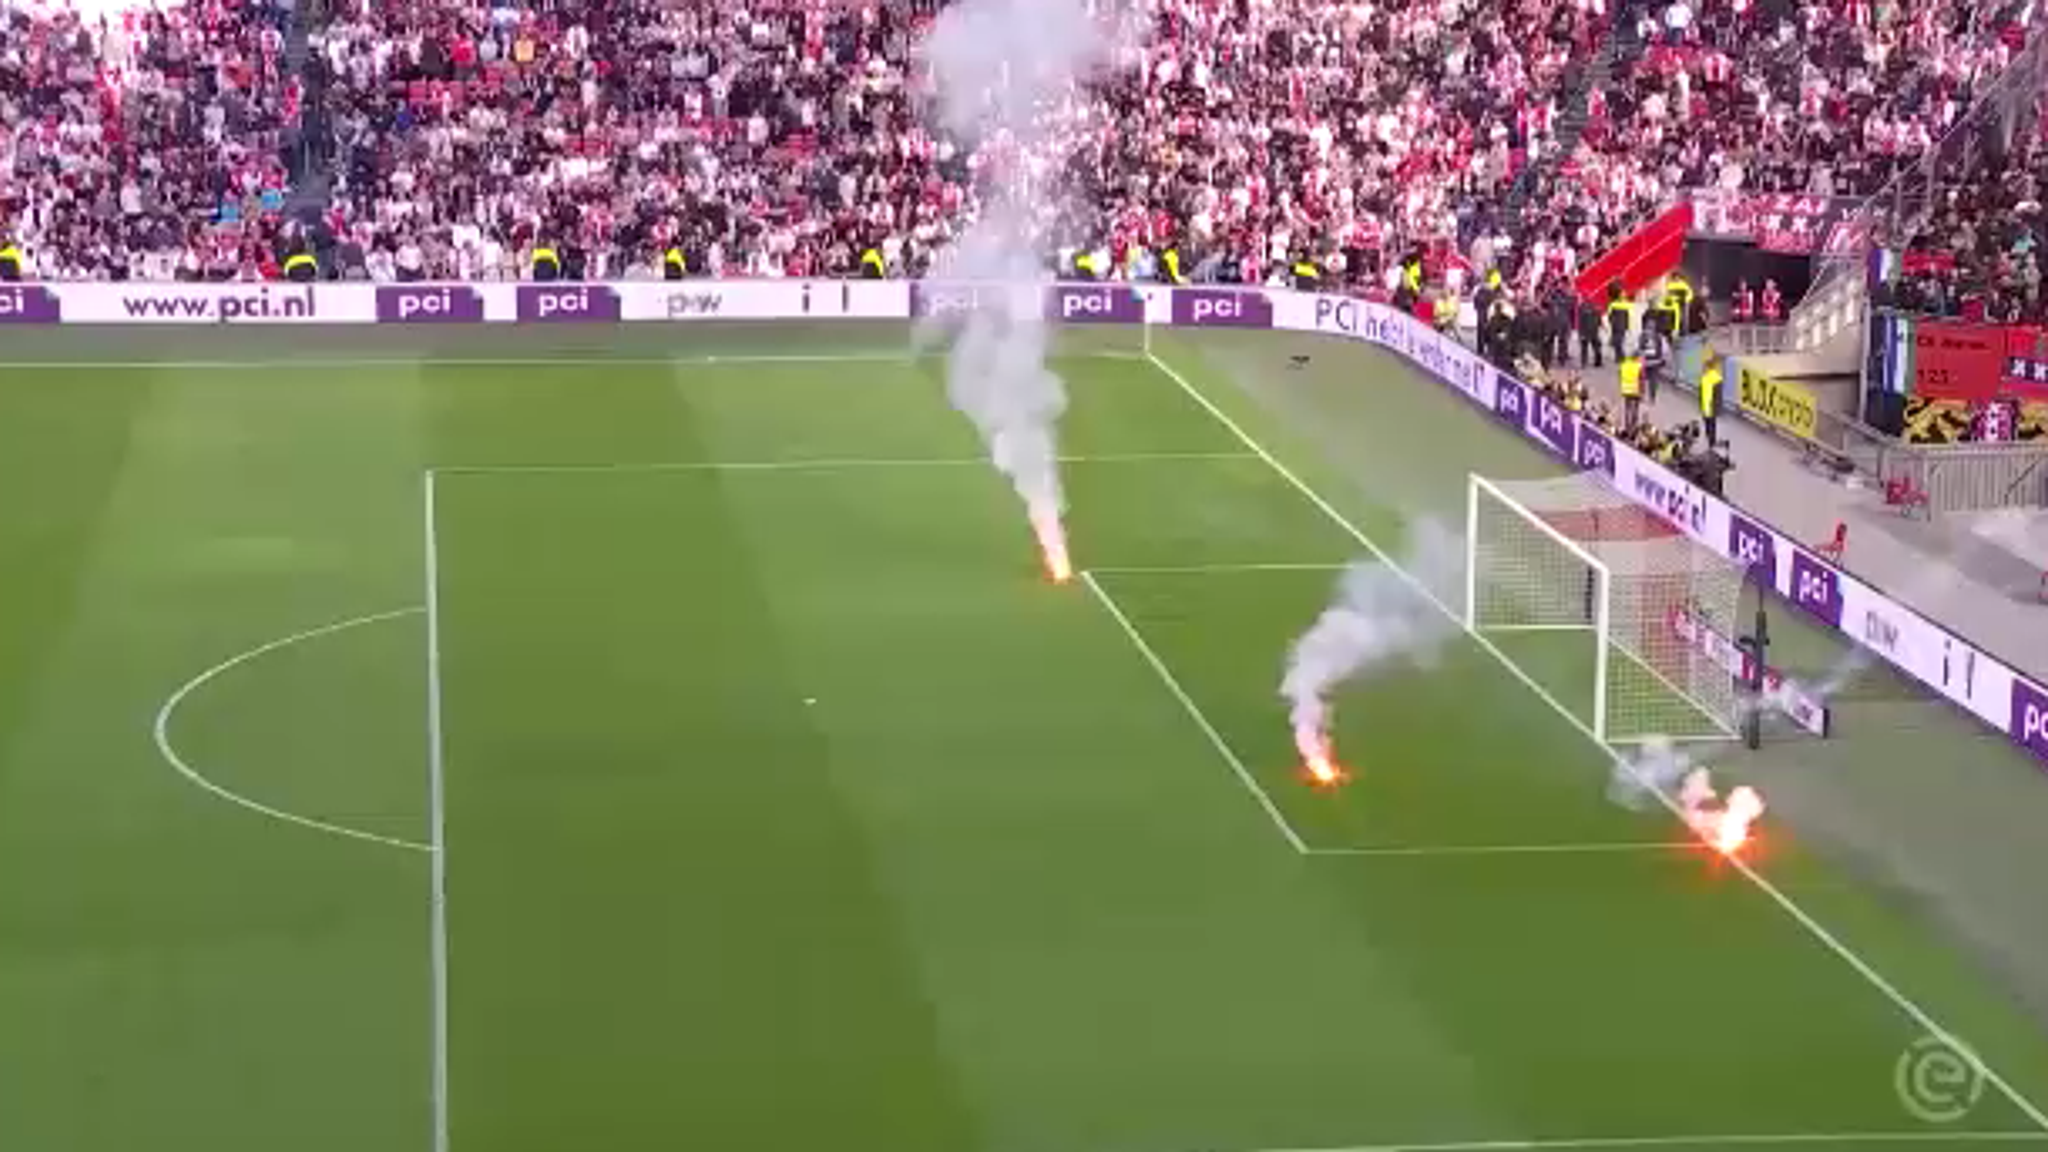 Ajax vs Feyenoord abandoned after flares thrown on to pitch at Johan Cruyff Arena World News Sky News